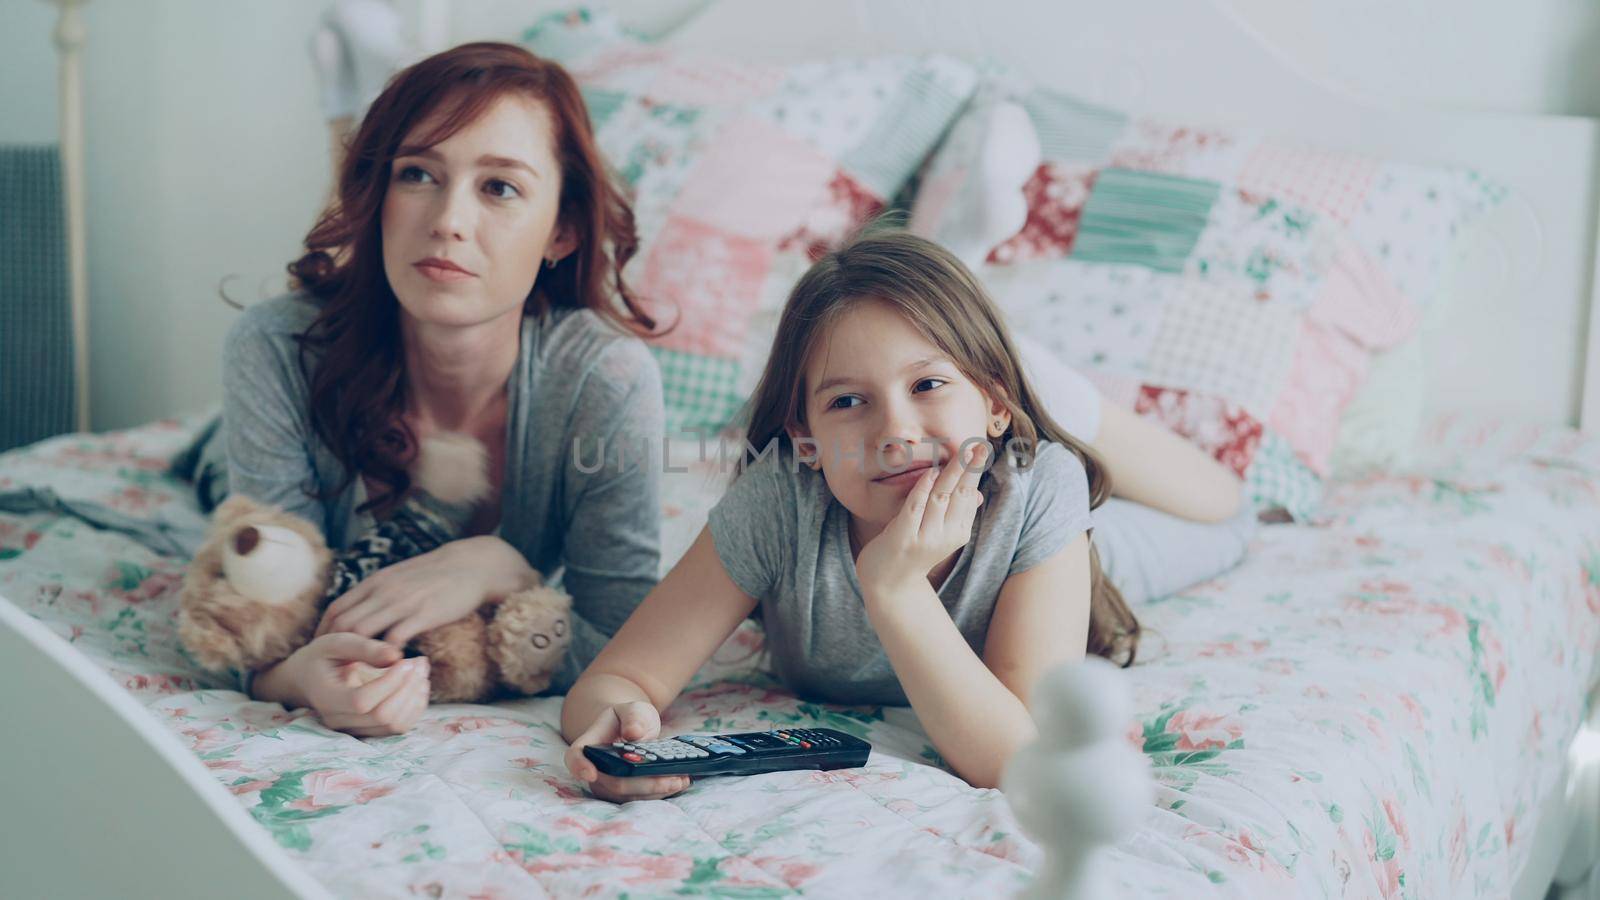 Cheerful happy mother with little daughter watching cartoon movie on TV using remote and smiling while lying on bed at home in cozy bedroom